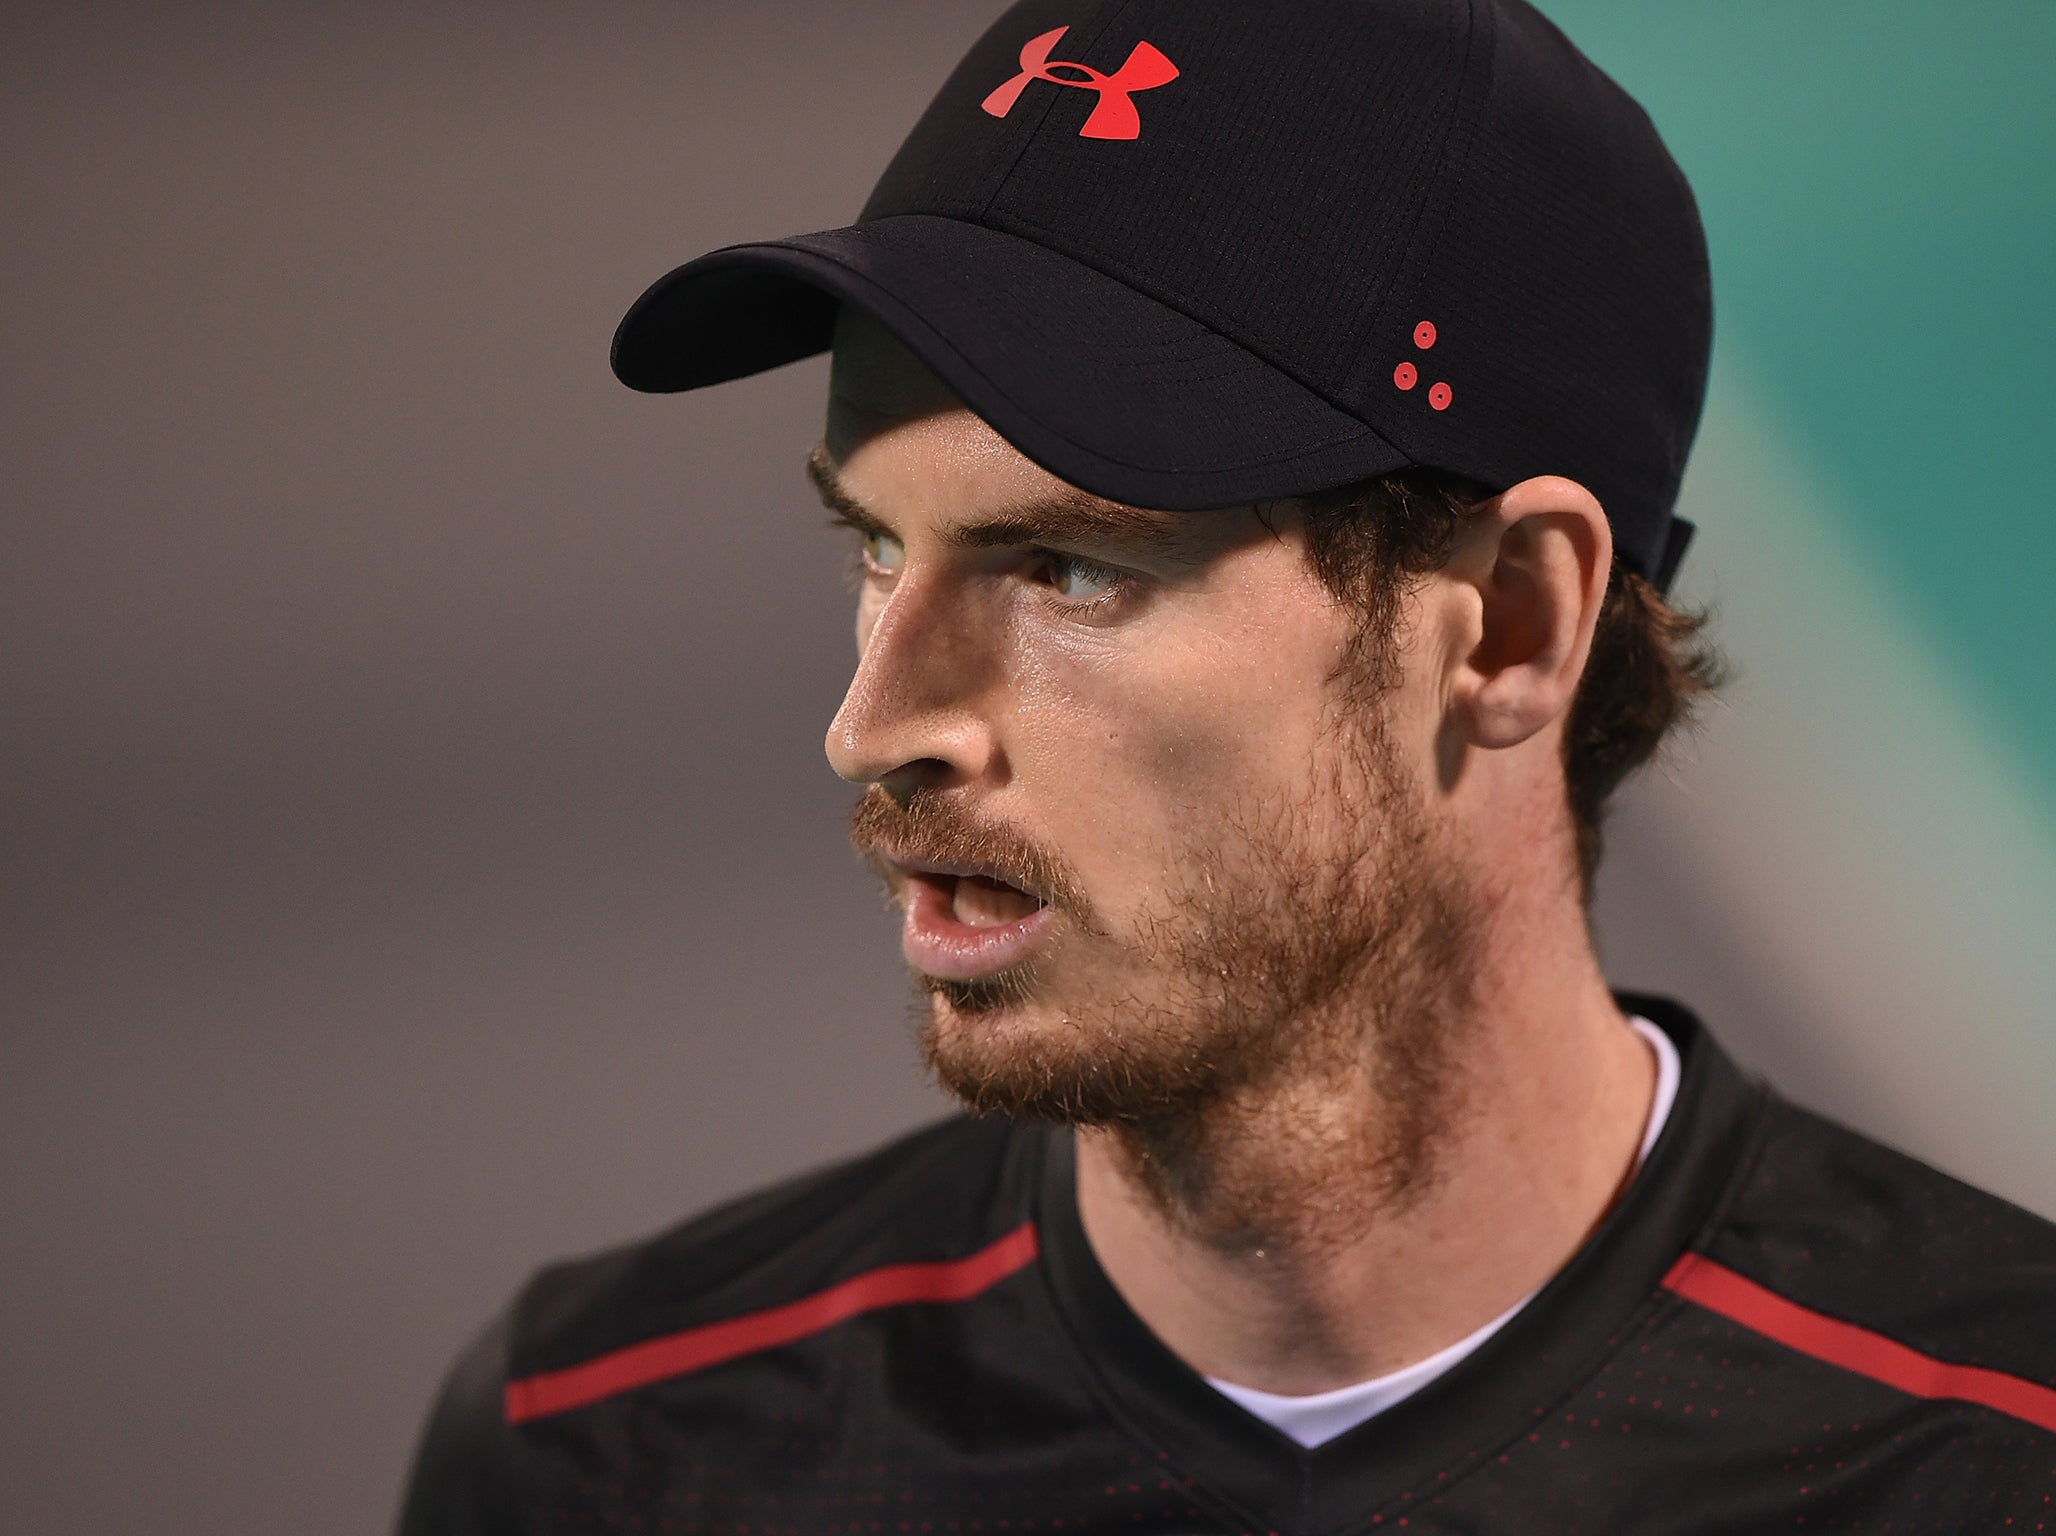 The amount Andy Murray invested has not been made public